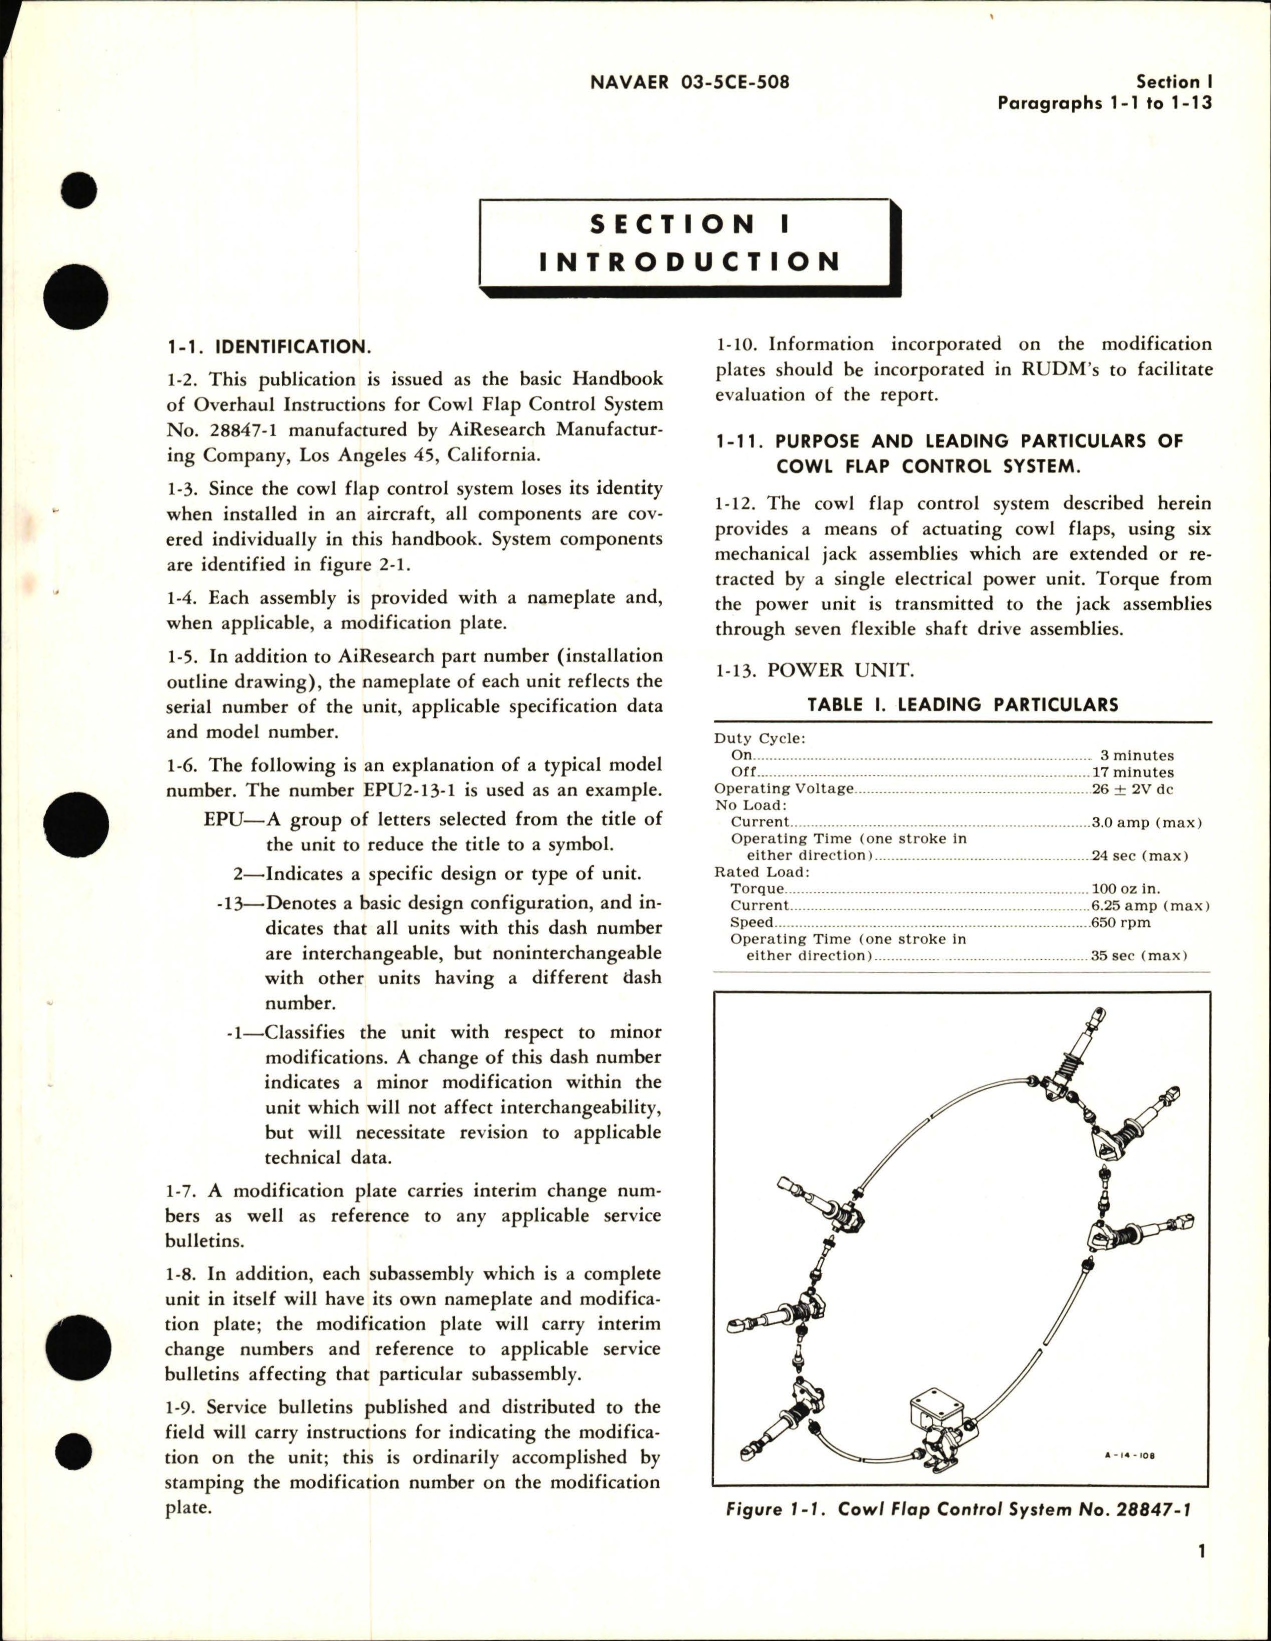 Sample page 5 from AirCorps Library document: Overhaul Instructions for Cowl Flap Control System - Part 28847-1